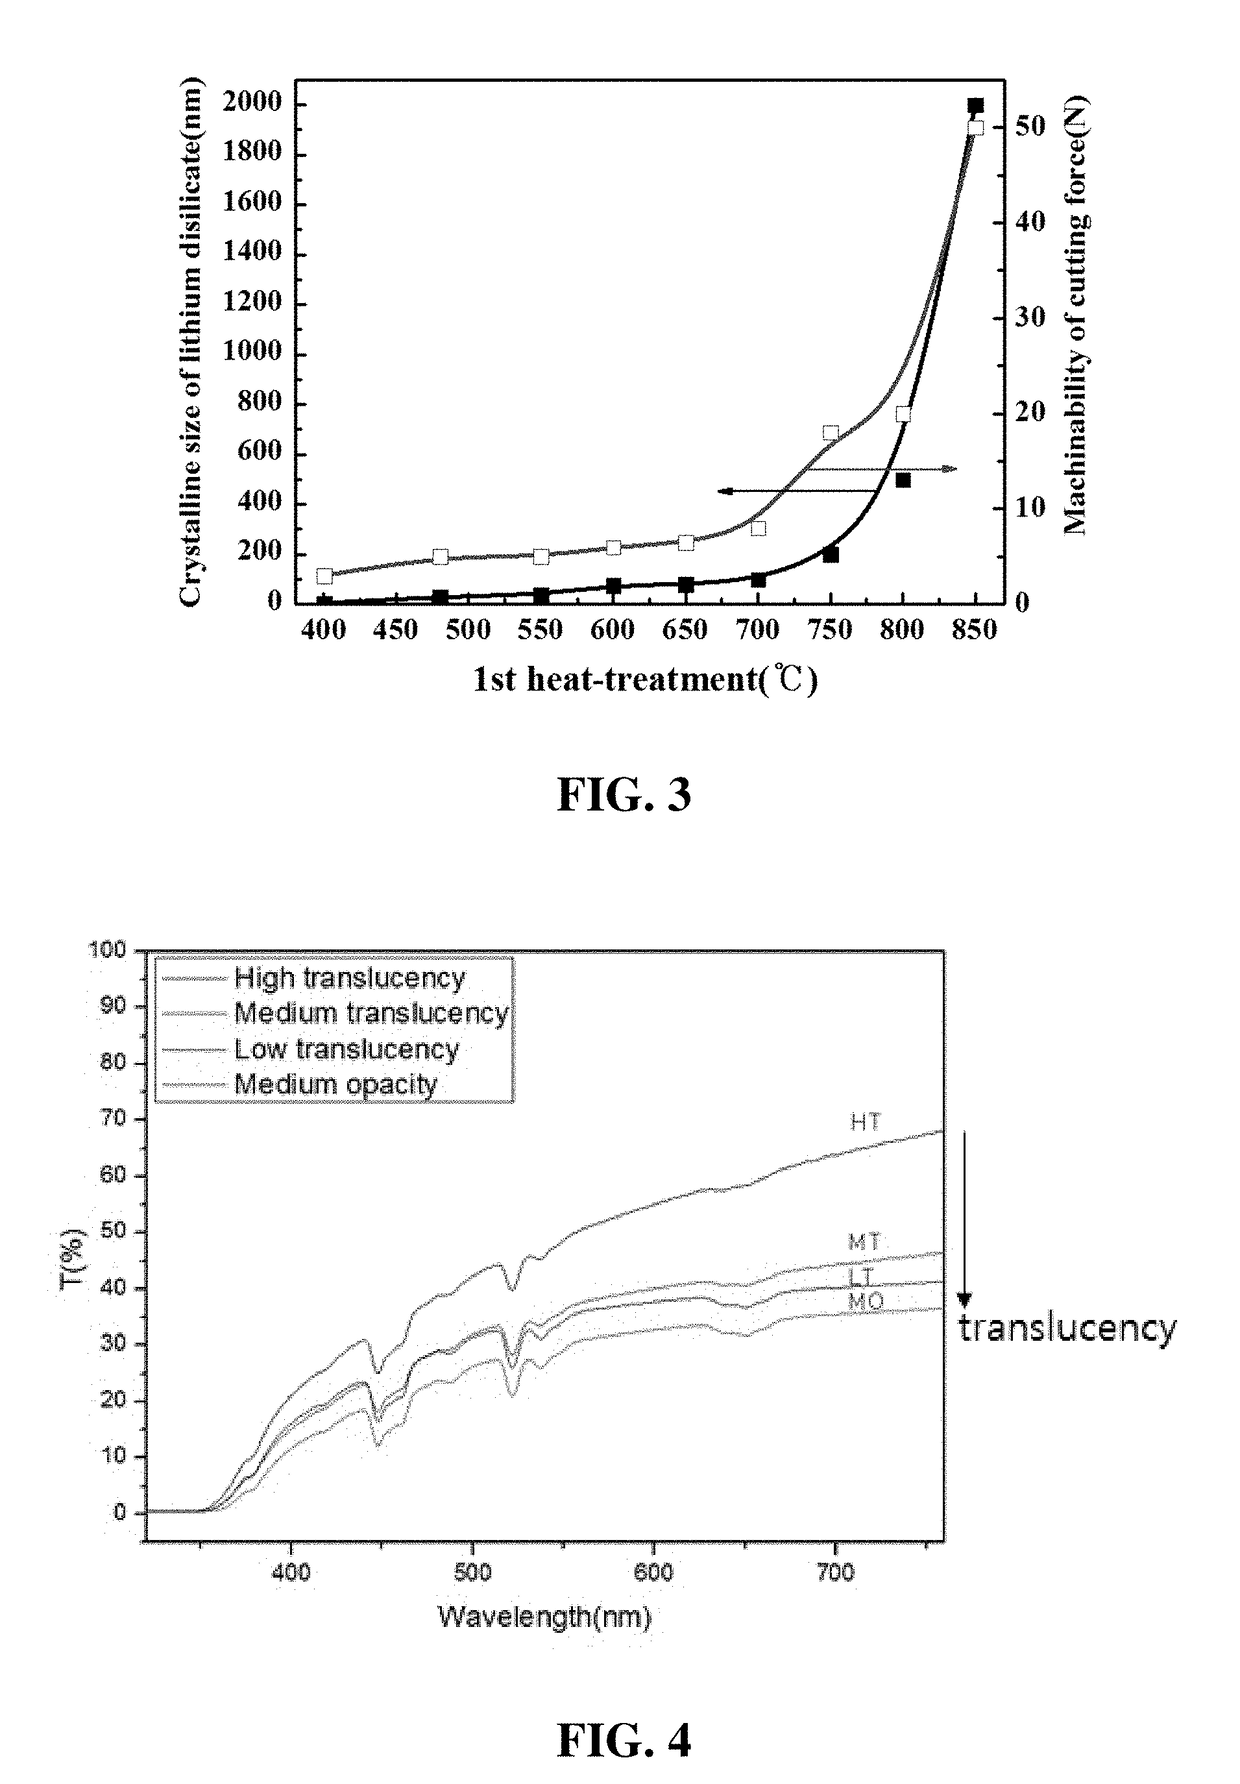 Method for preparing glass-ceramics, capable of adjusting machinability or translucency through change in temperature of heat treatment